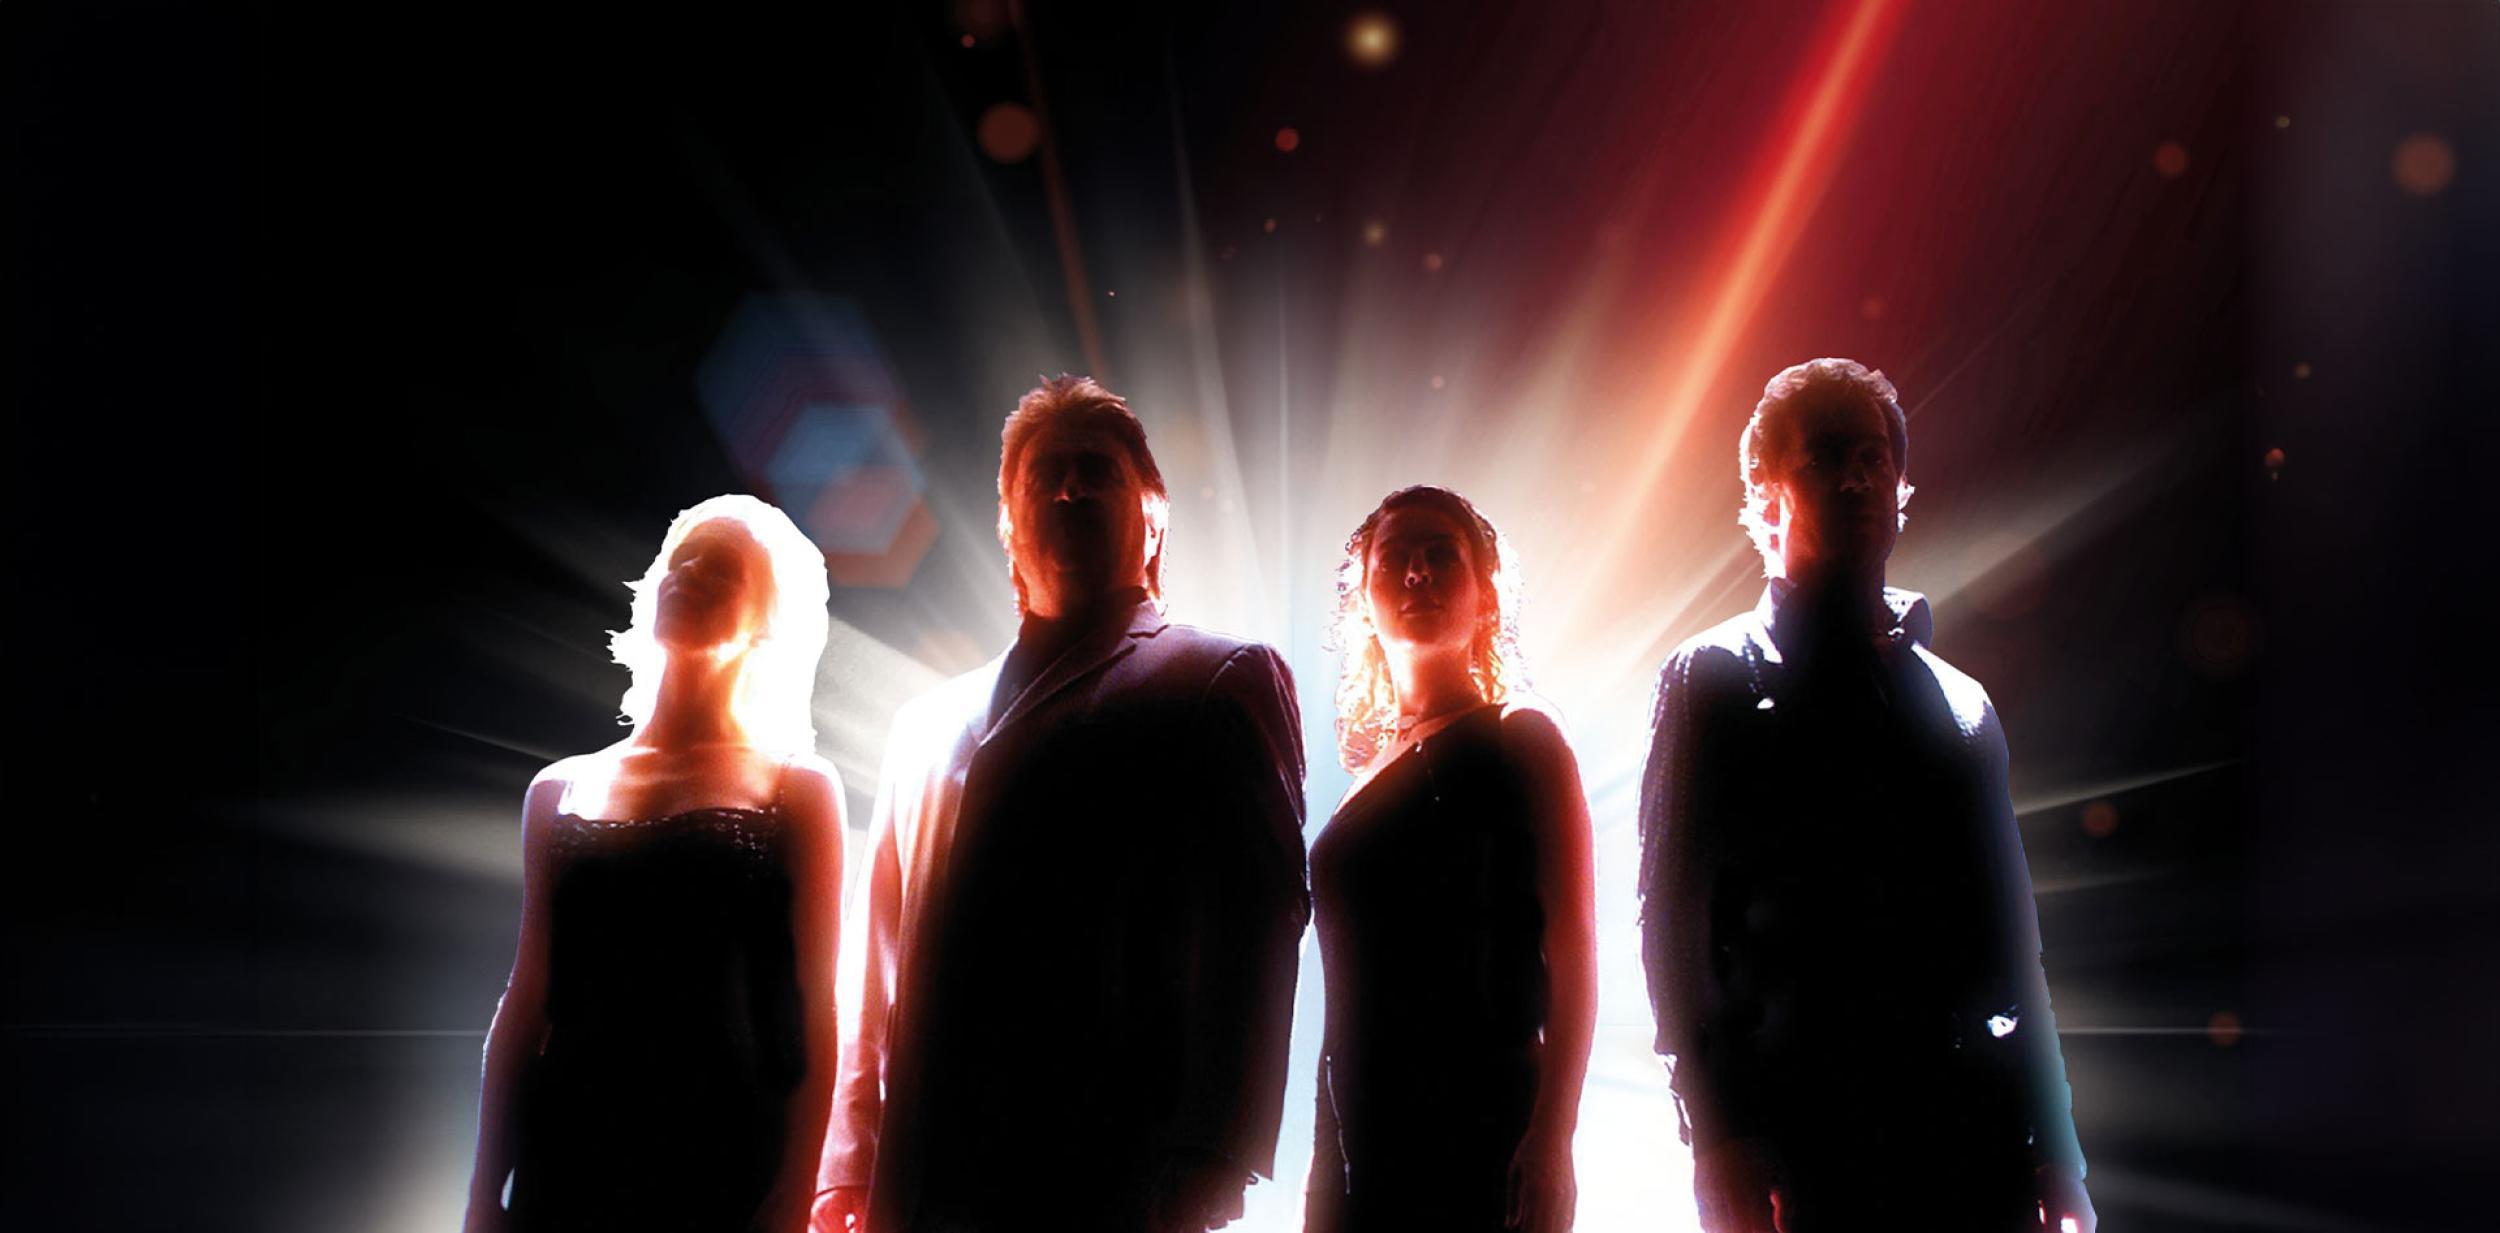 The silhouette of four people in front of a bright light